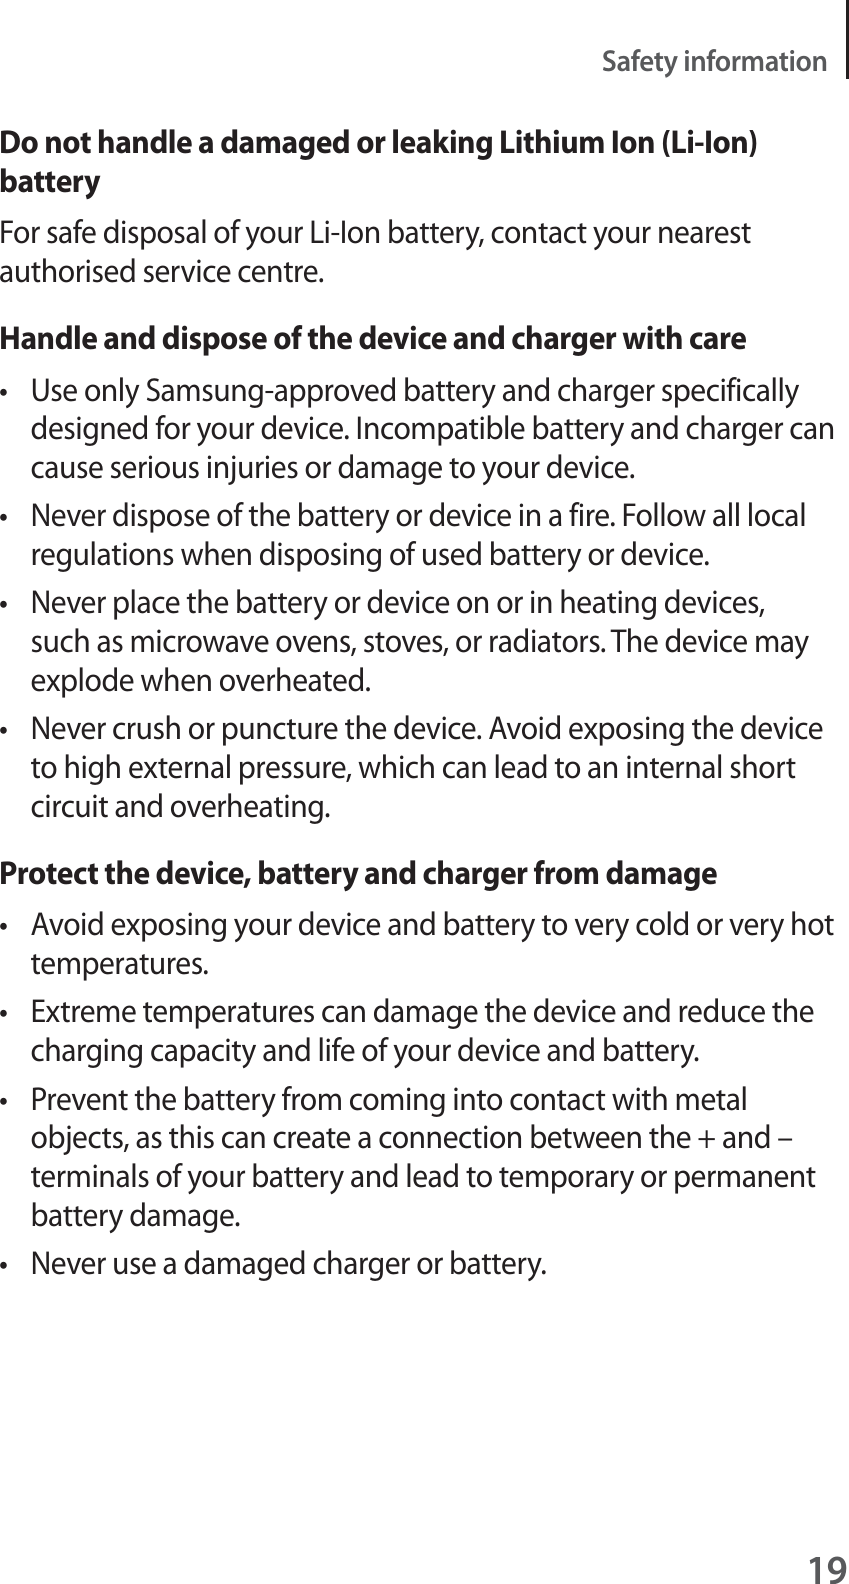 19Safety informationDo not handle a damaged or leaking Lithium Ion (Li-Ion) batteryFor safe disposal of your Li-Ion battery, contact your nearest authorised service centre.Handle and dispose of the device and charger with caret Use only Samsung-approved battery and charger specifically designed for your device. Incompatible battery and charger can cause serious injuries or damage to your device.t Never dispose of the battery or device in a fire. Follow all local regulations when disposing of used battery or device.t Never place the battery or device on or in heating devices, such as microwave ovens, stoves, or radiators. The device may explode when overheated.t Never crush or puncture the device. Avoid exposing the device to high external pressure, which can lead to an internal short circuit and overheating.Protect the device, battery and charger from damaget Avoid exposing your device and battery to very cold or very hot temperatures.t Extreme temperatures can damage the device and reduce the charging capacity and life of your device and battery.t Prevent the battery from coming into contact with metal objects, as this can create a connection between the + and – terminals of your battery and lead to temporary or permanent battery damage.t Never use a damaged charger or battery.